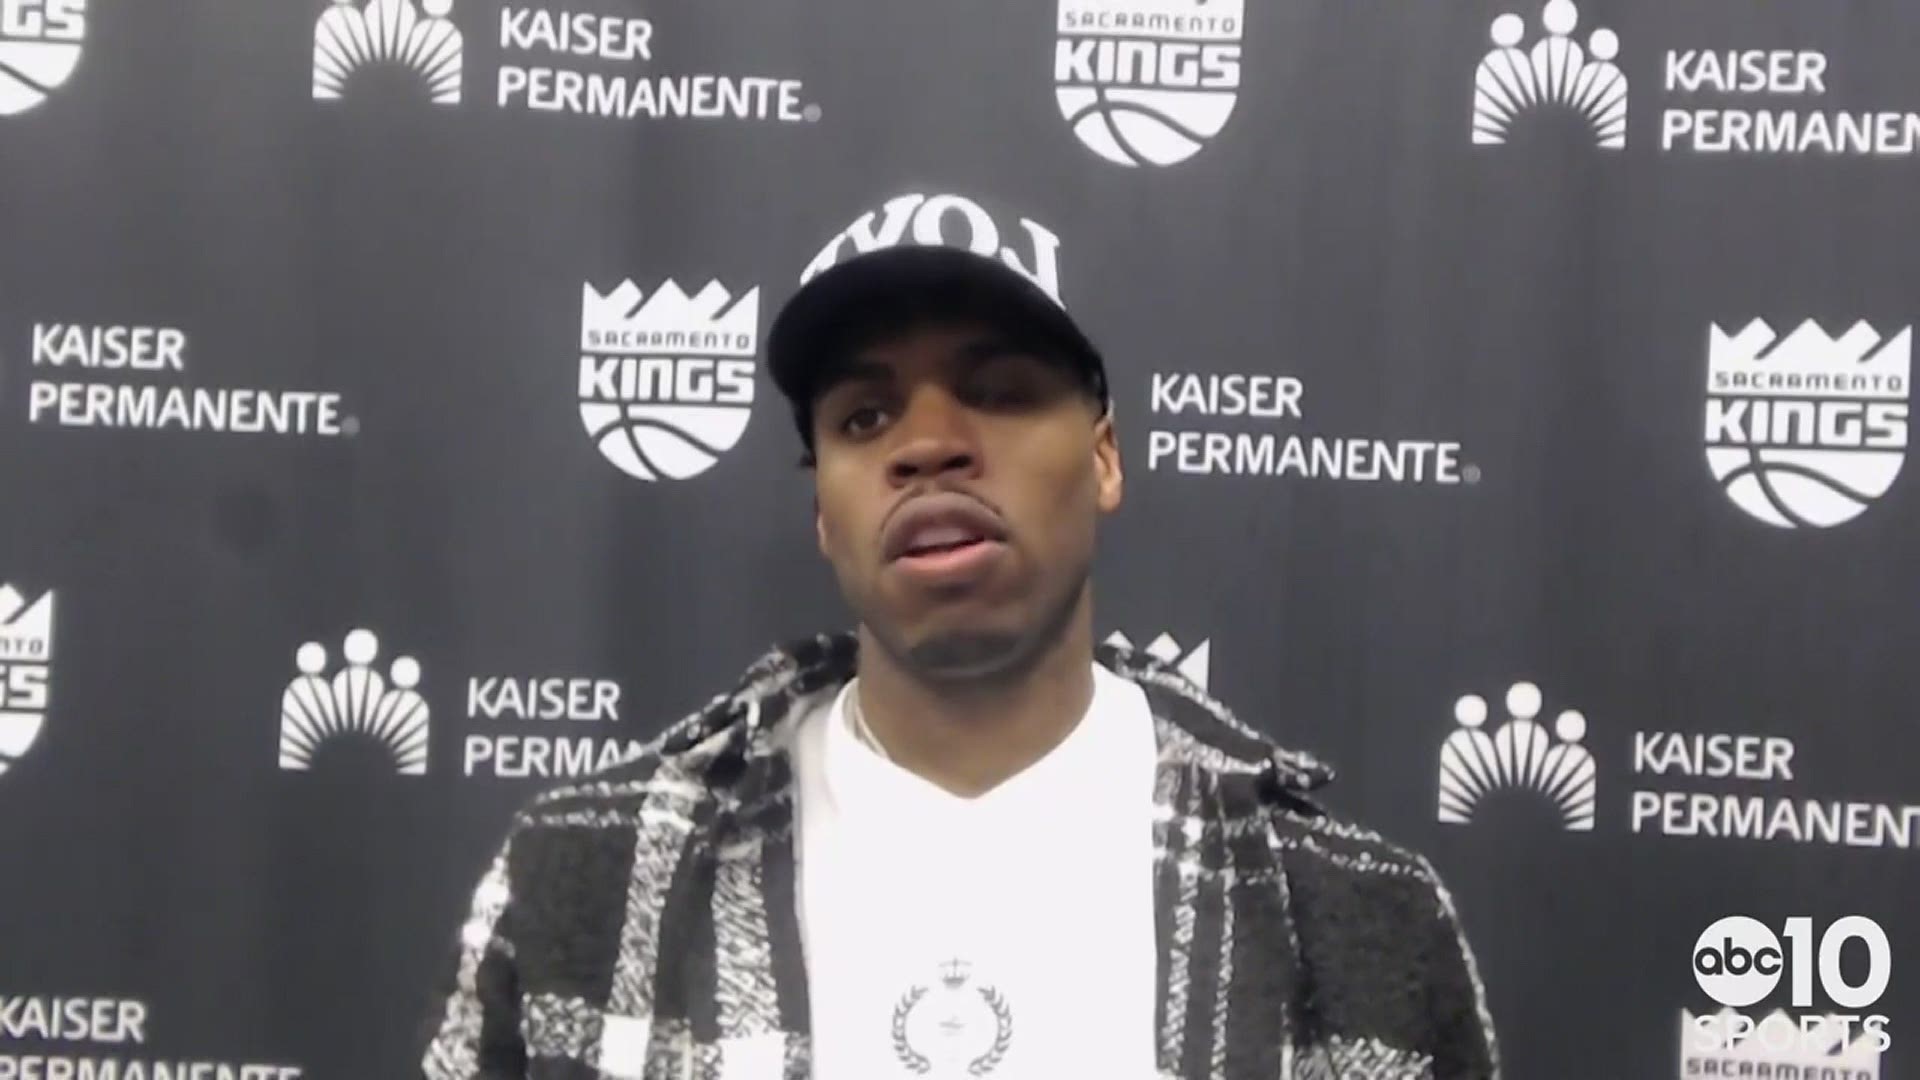 Buddy Hield on the way his Sacramento Kings stepped up after losing Tyrese Haliburton to a scary knee injury in Sunday's 111-99 win in Dallas over the Mavericks.